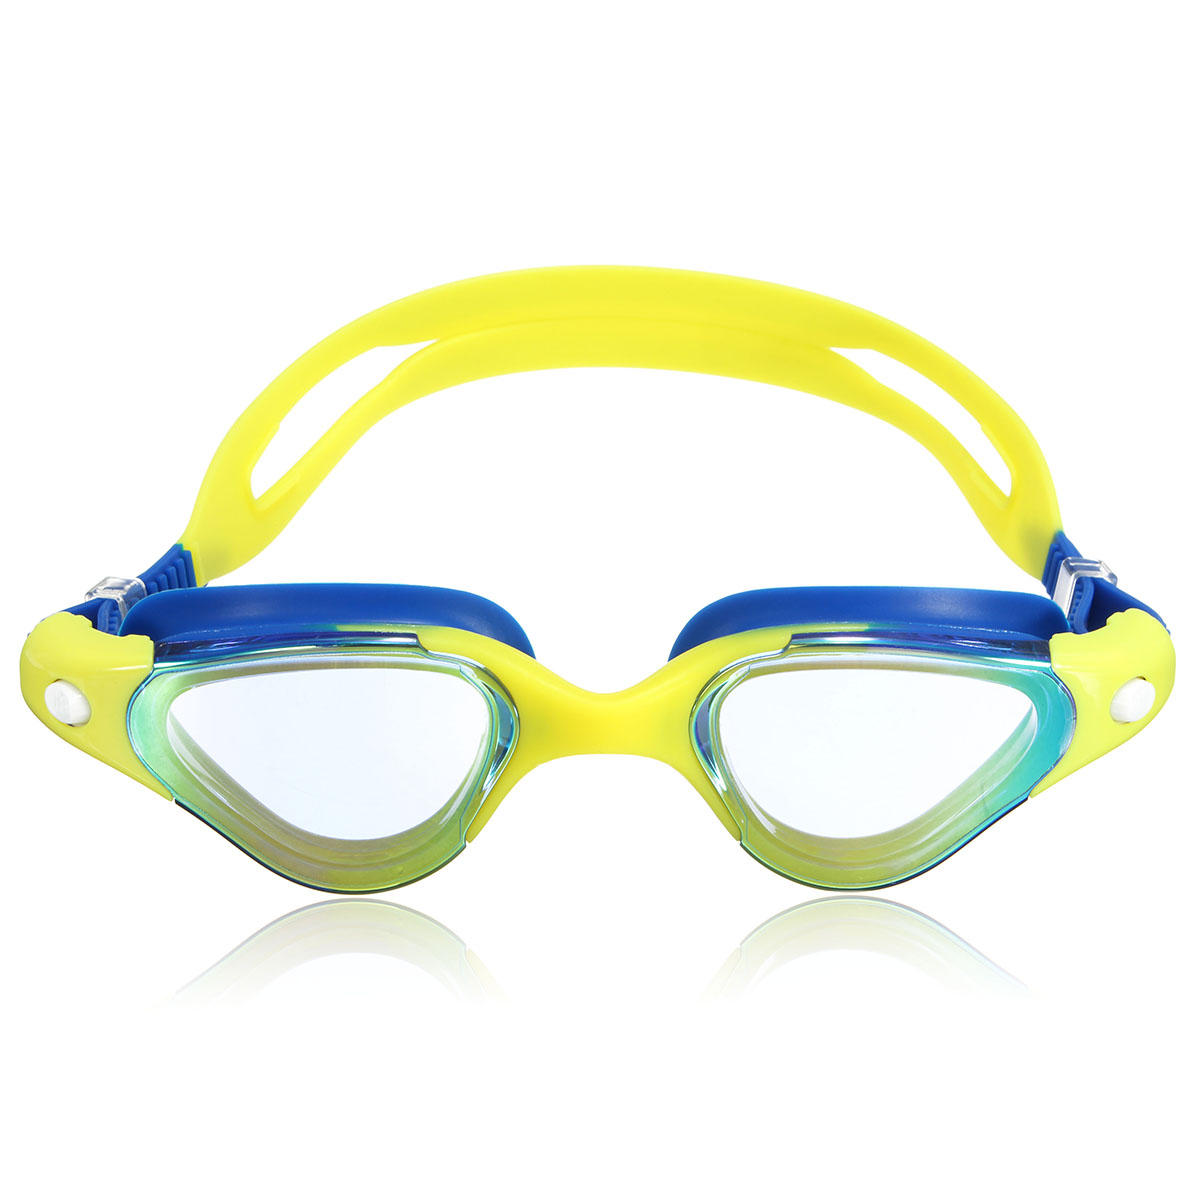 OUTERDO-Anti-Fog-UV-Protection-Swimming-Goggles-with-Silicone-Soft-Earplugs-Waterproof-Goggles-for-A-1886112-1